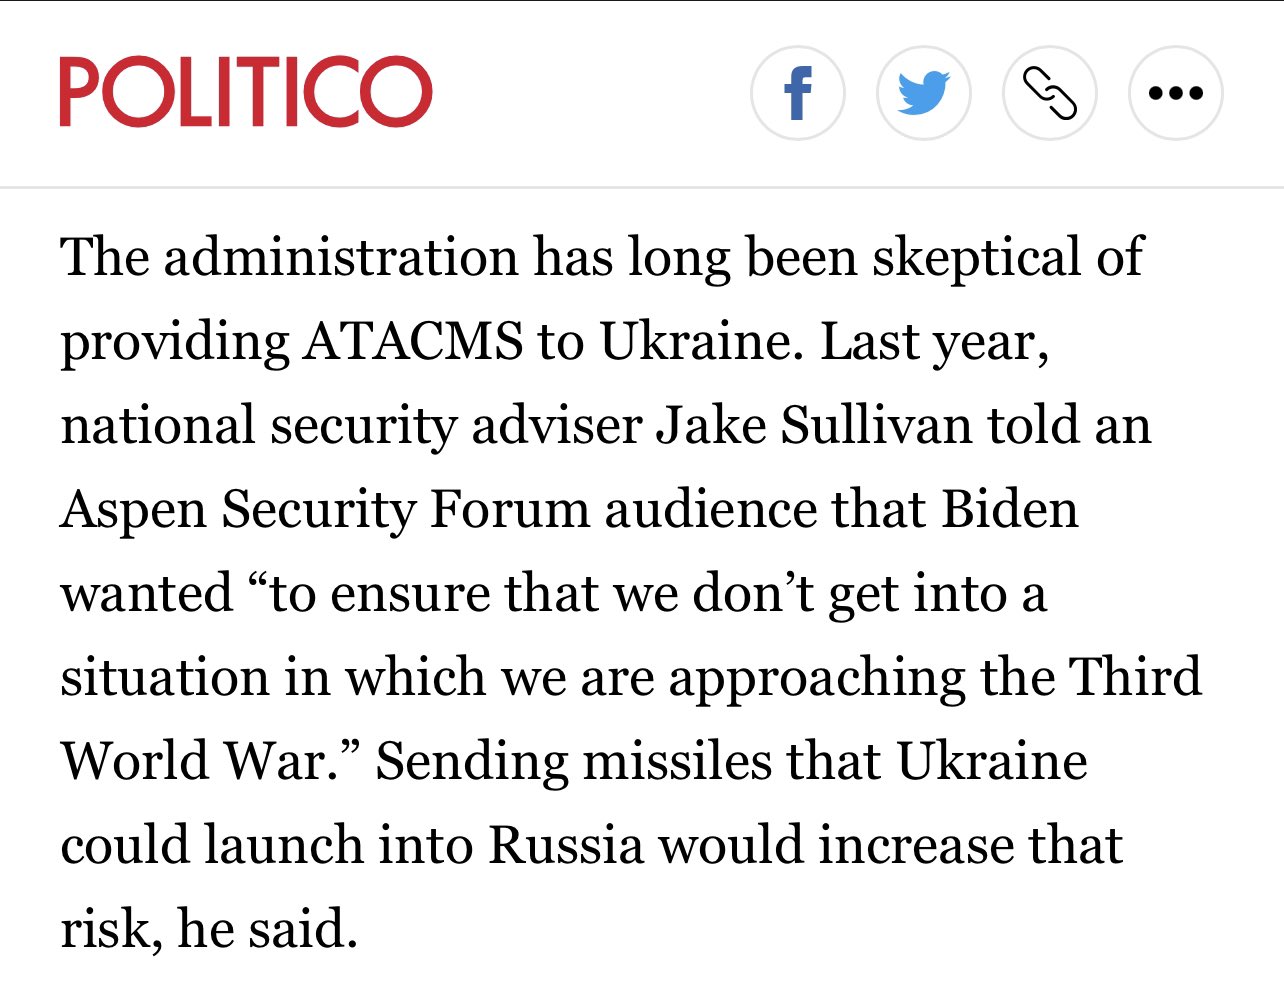 Screen grab of a Politico article from 2022 quoting US National Security Officer Jake Sullivan regarding concerns that sending longer range missiles to Ukraine would escalate into World War III